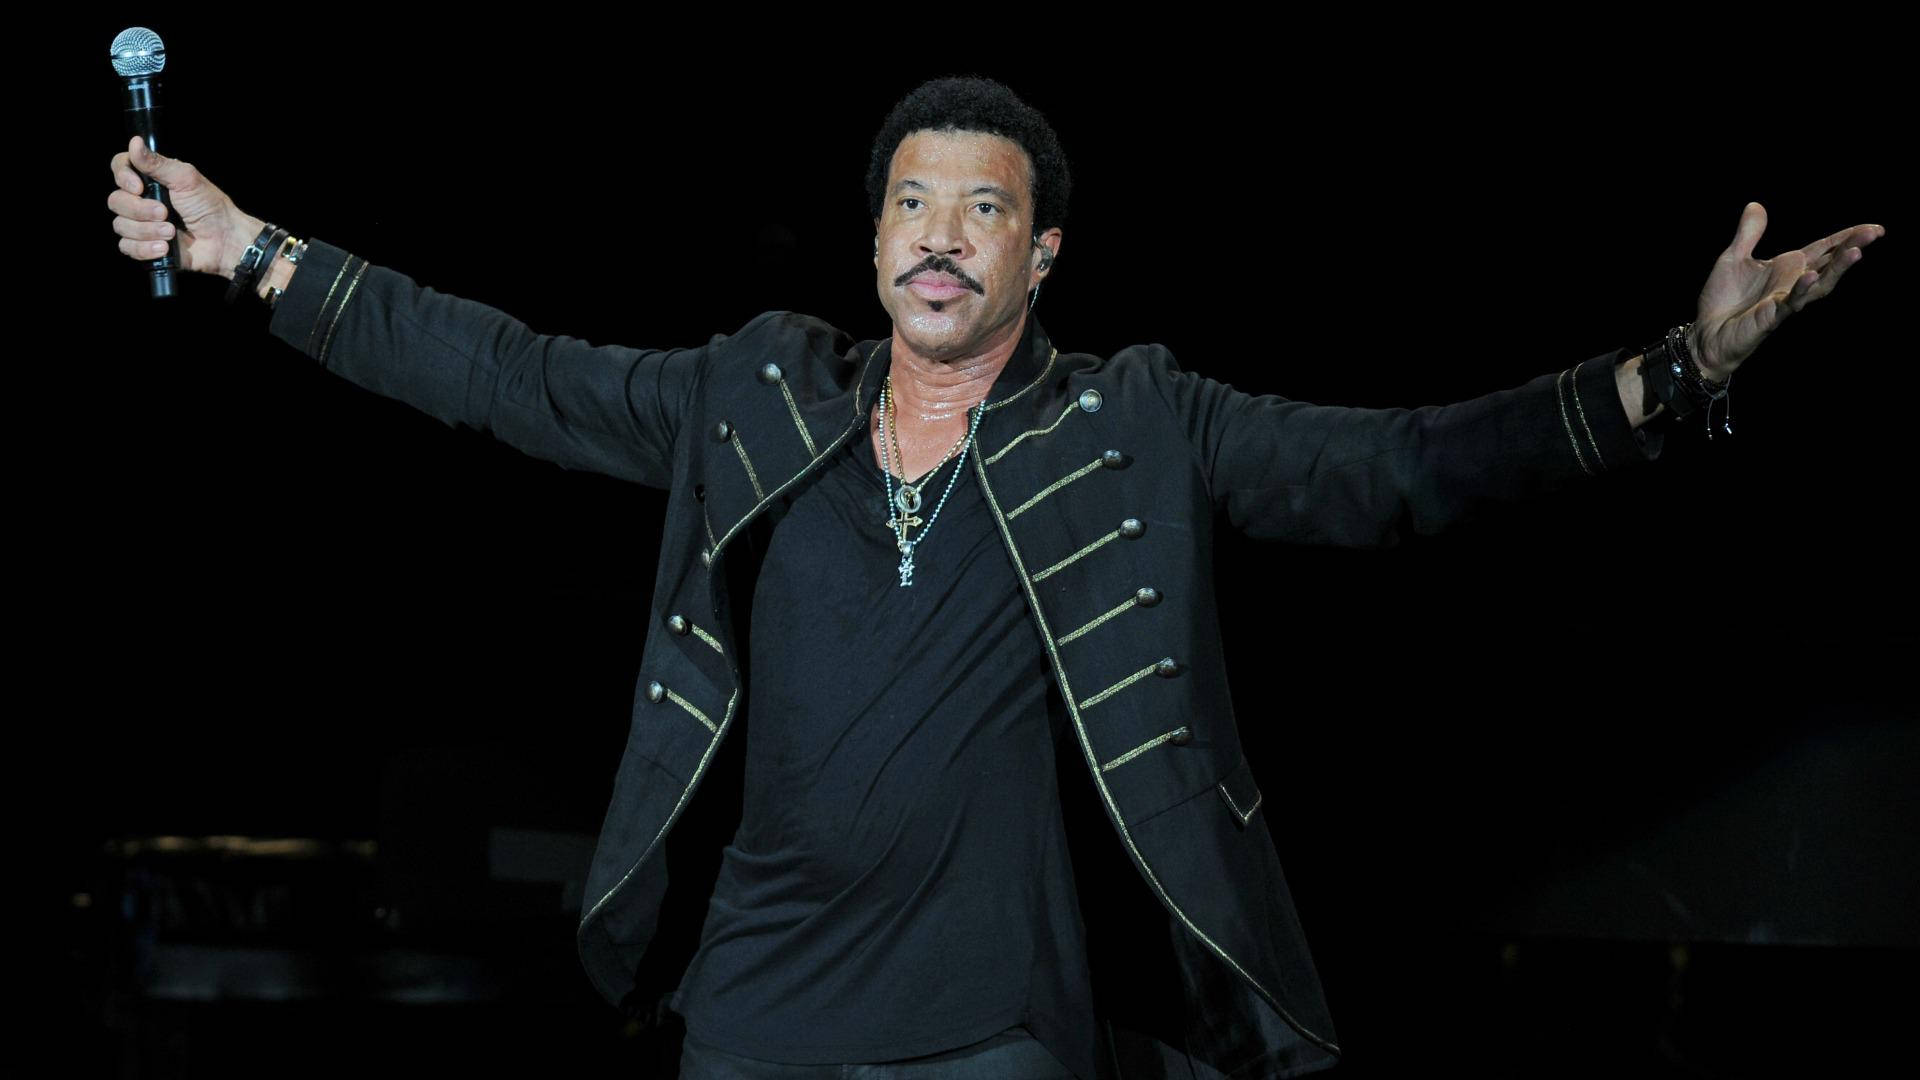 Lionelrichie Bonnaroo 2014 Is Already In German. It Refers To A Music Festival Where Lionel Richie Performed In 2014. Wallpaper